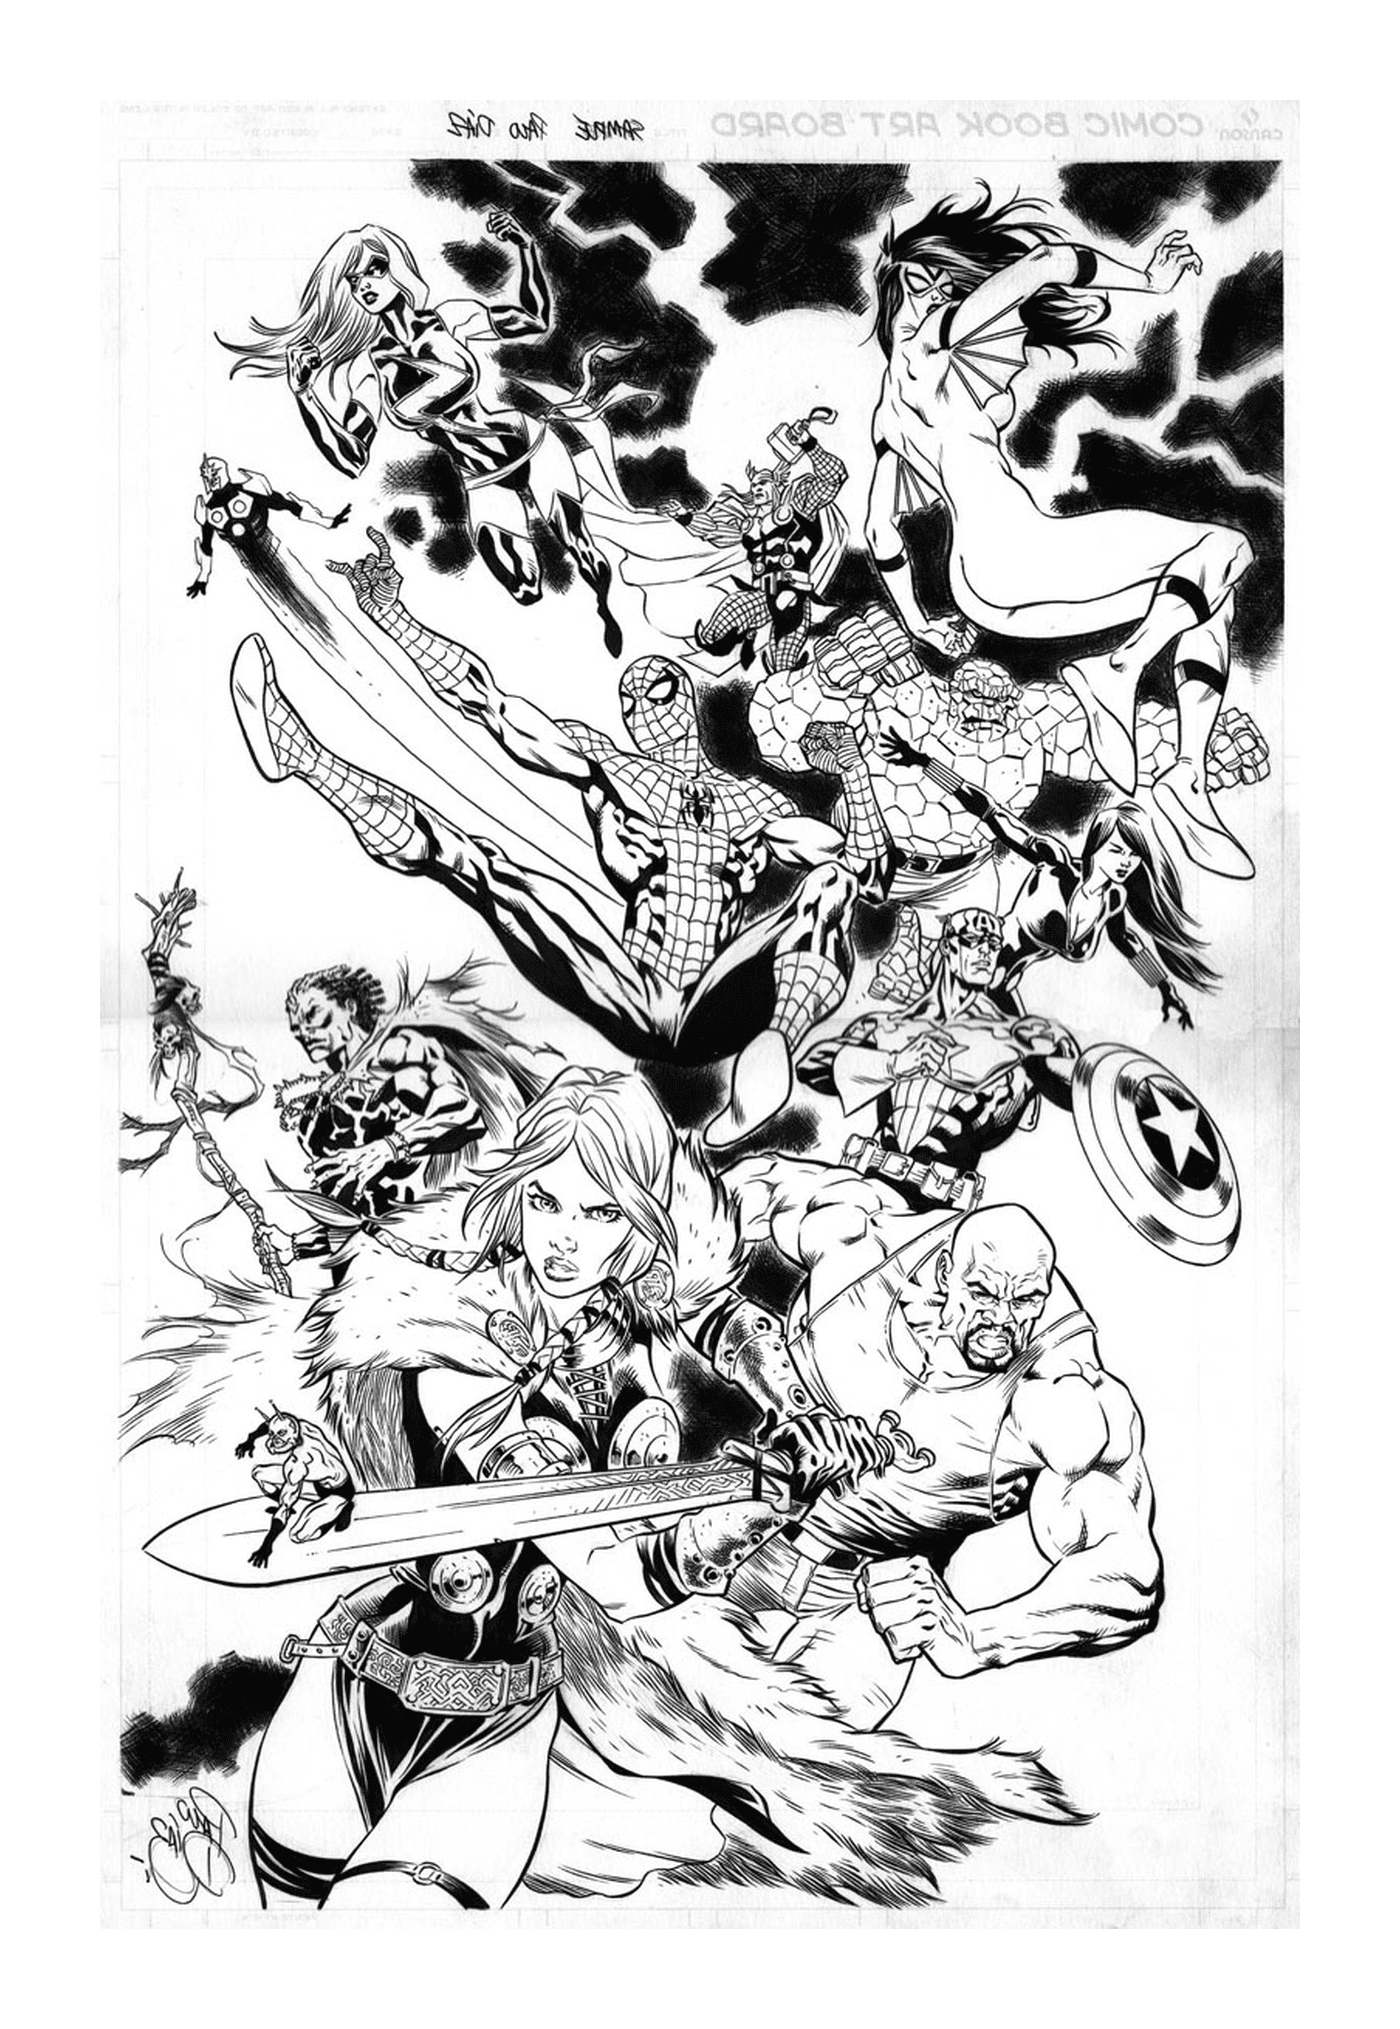  A group of superheroes in black and white 